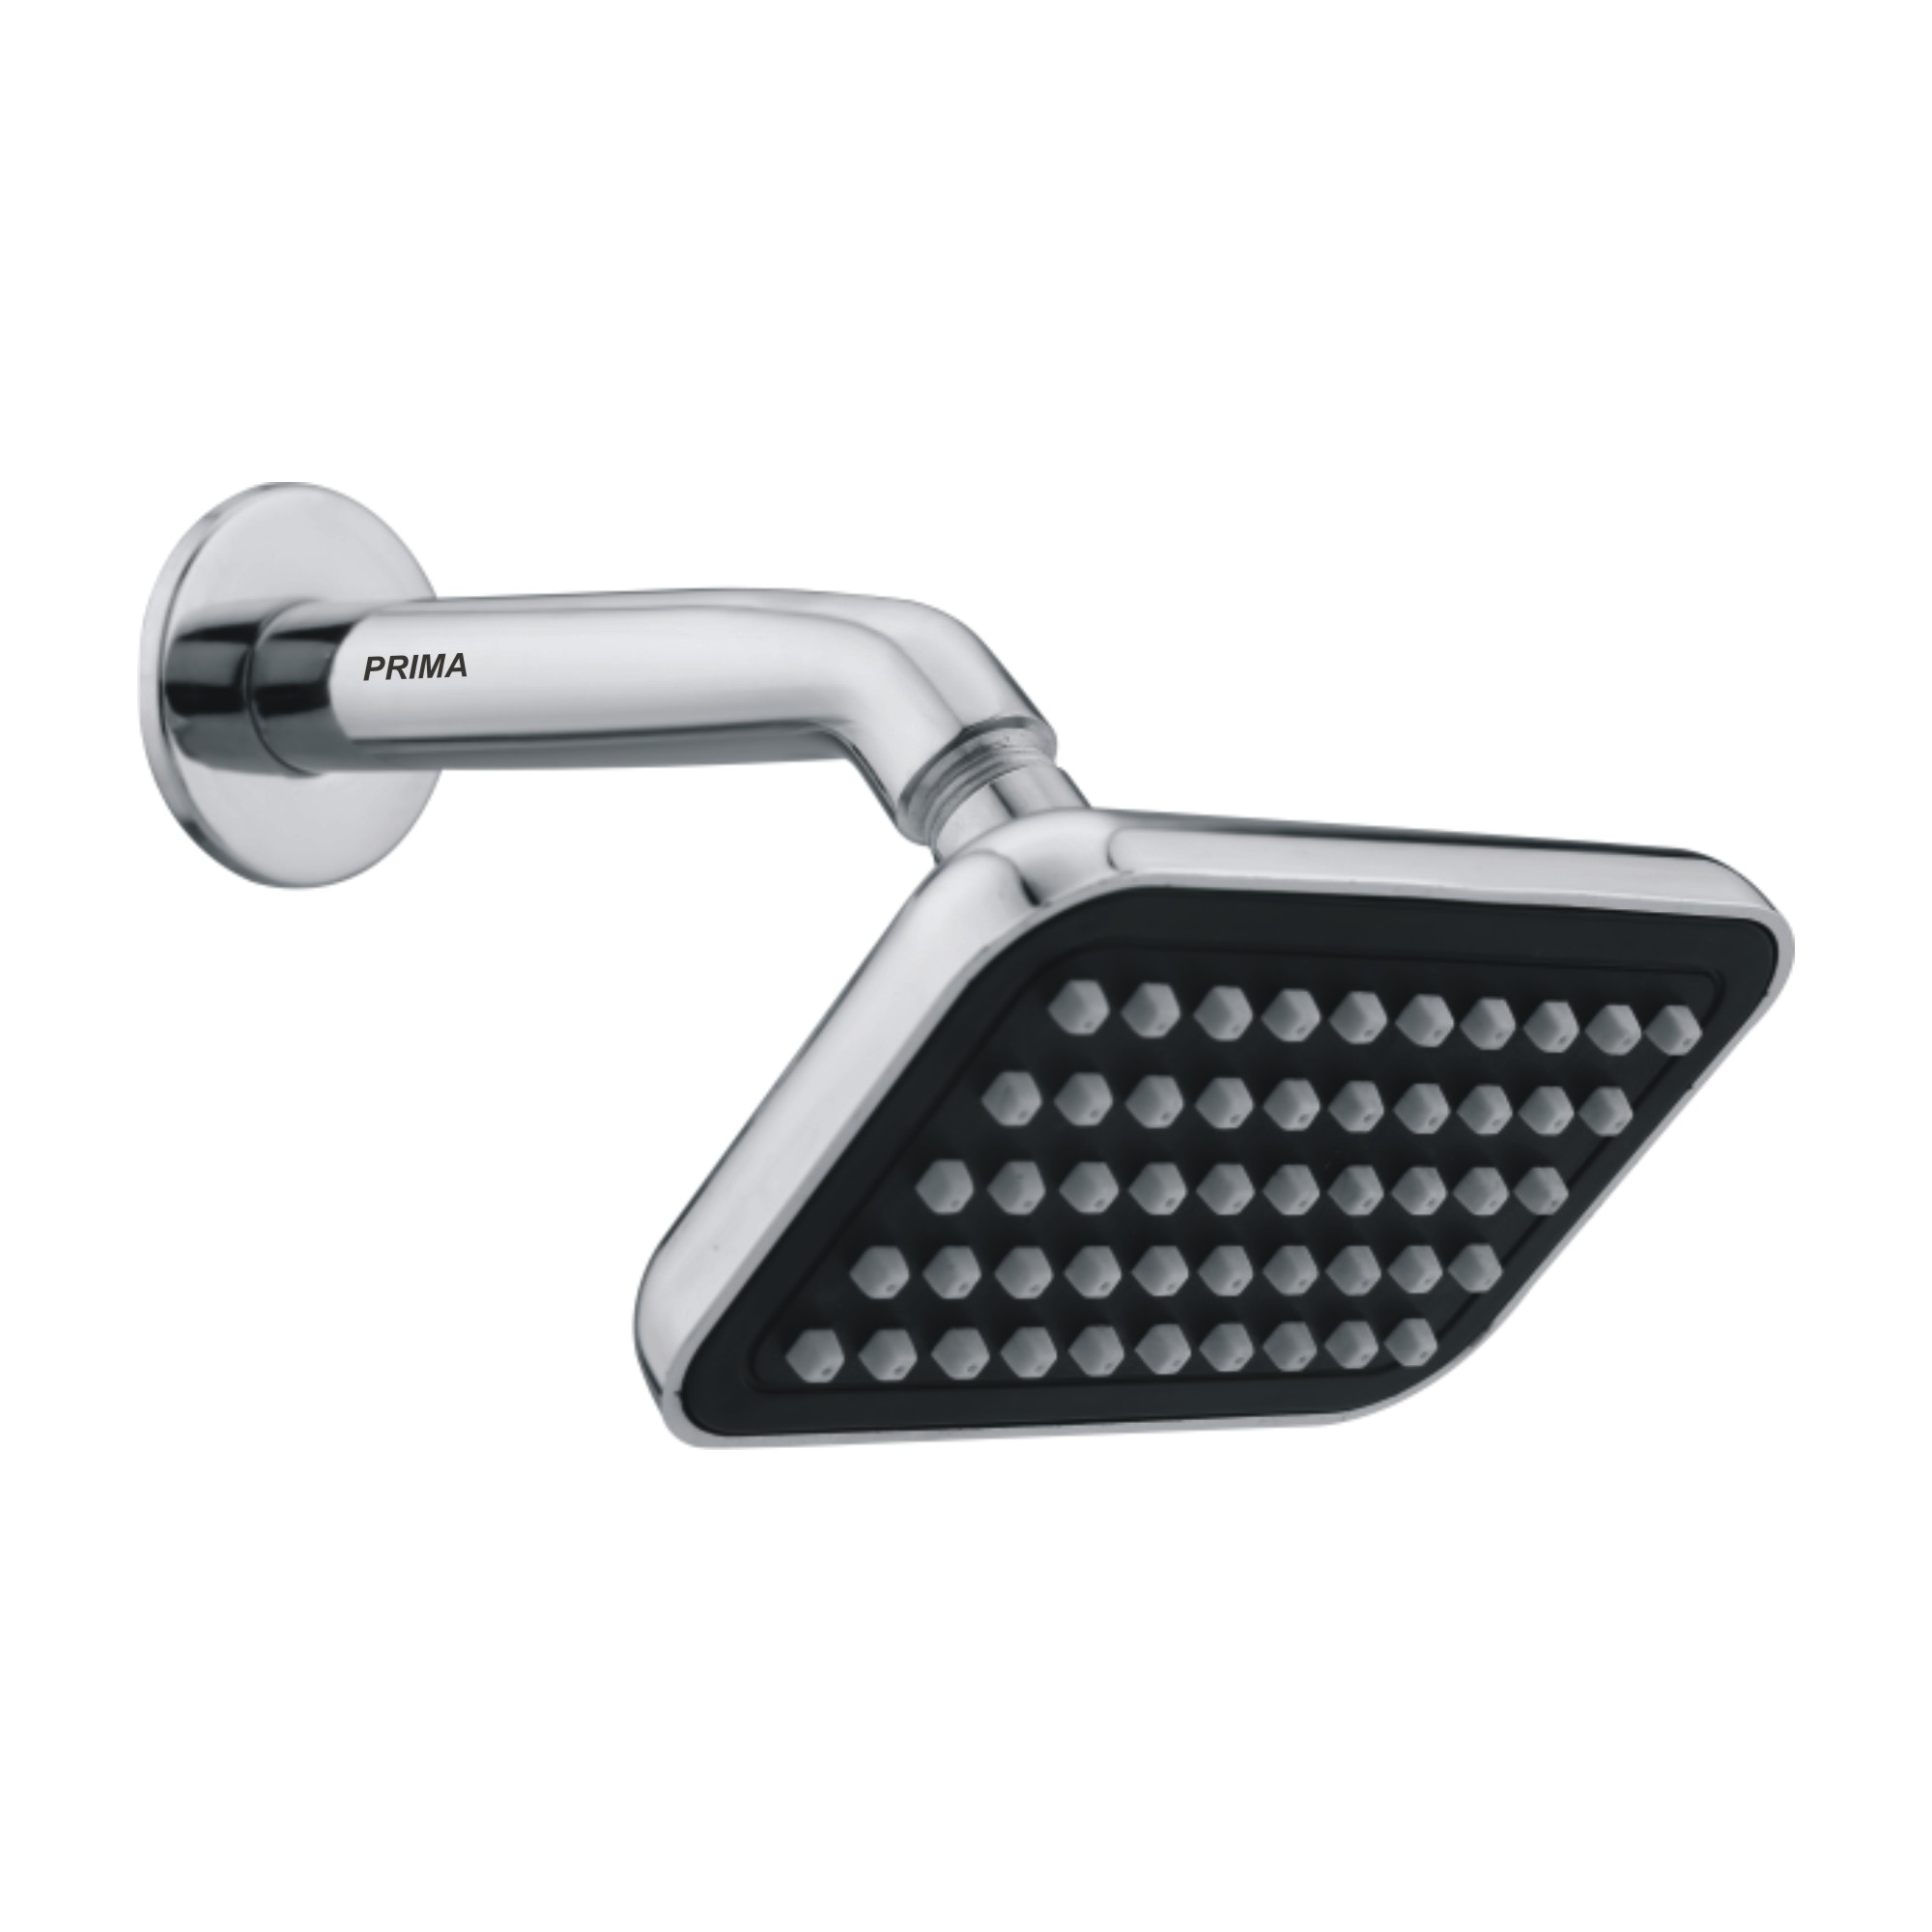 C.P Overhead Shower with Arm - Recta 